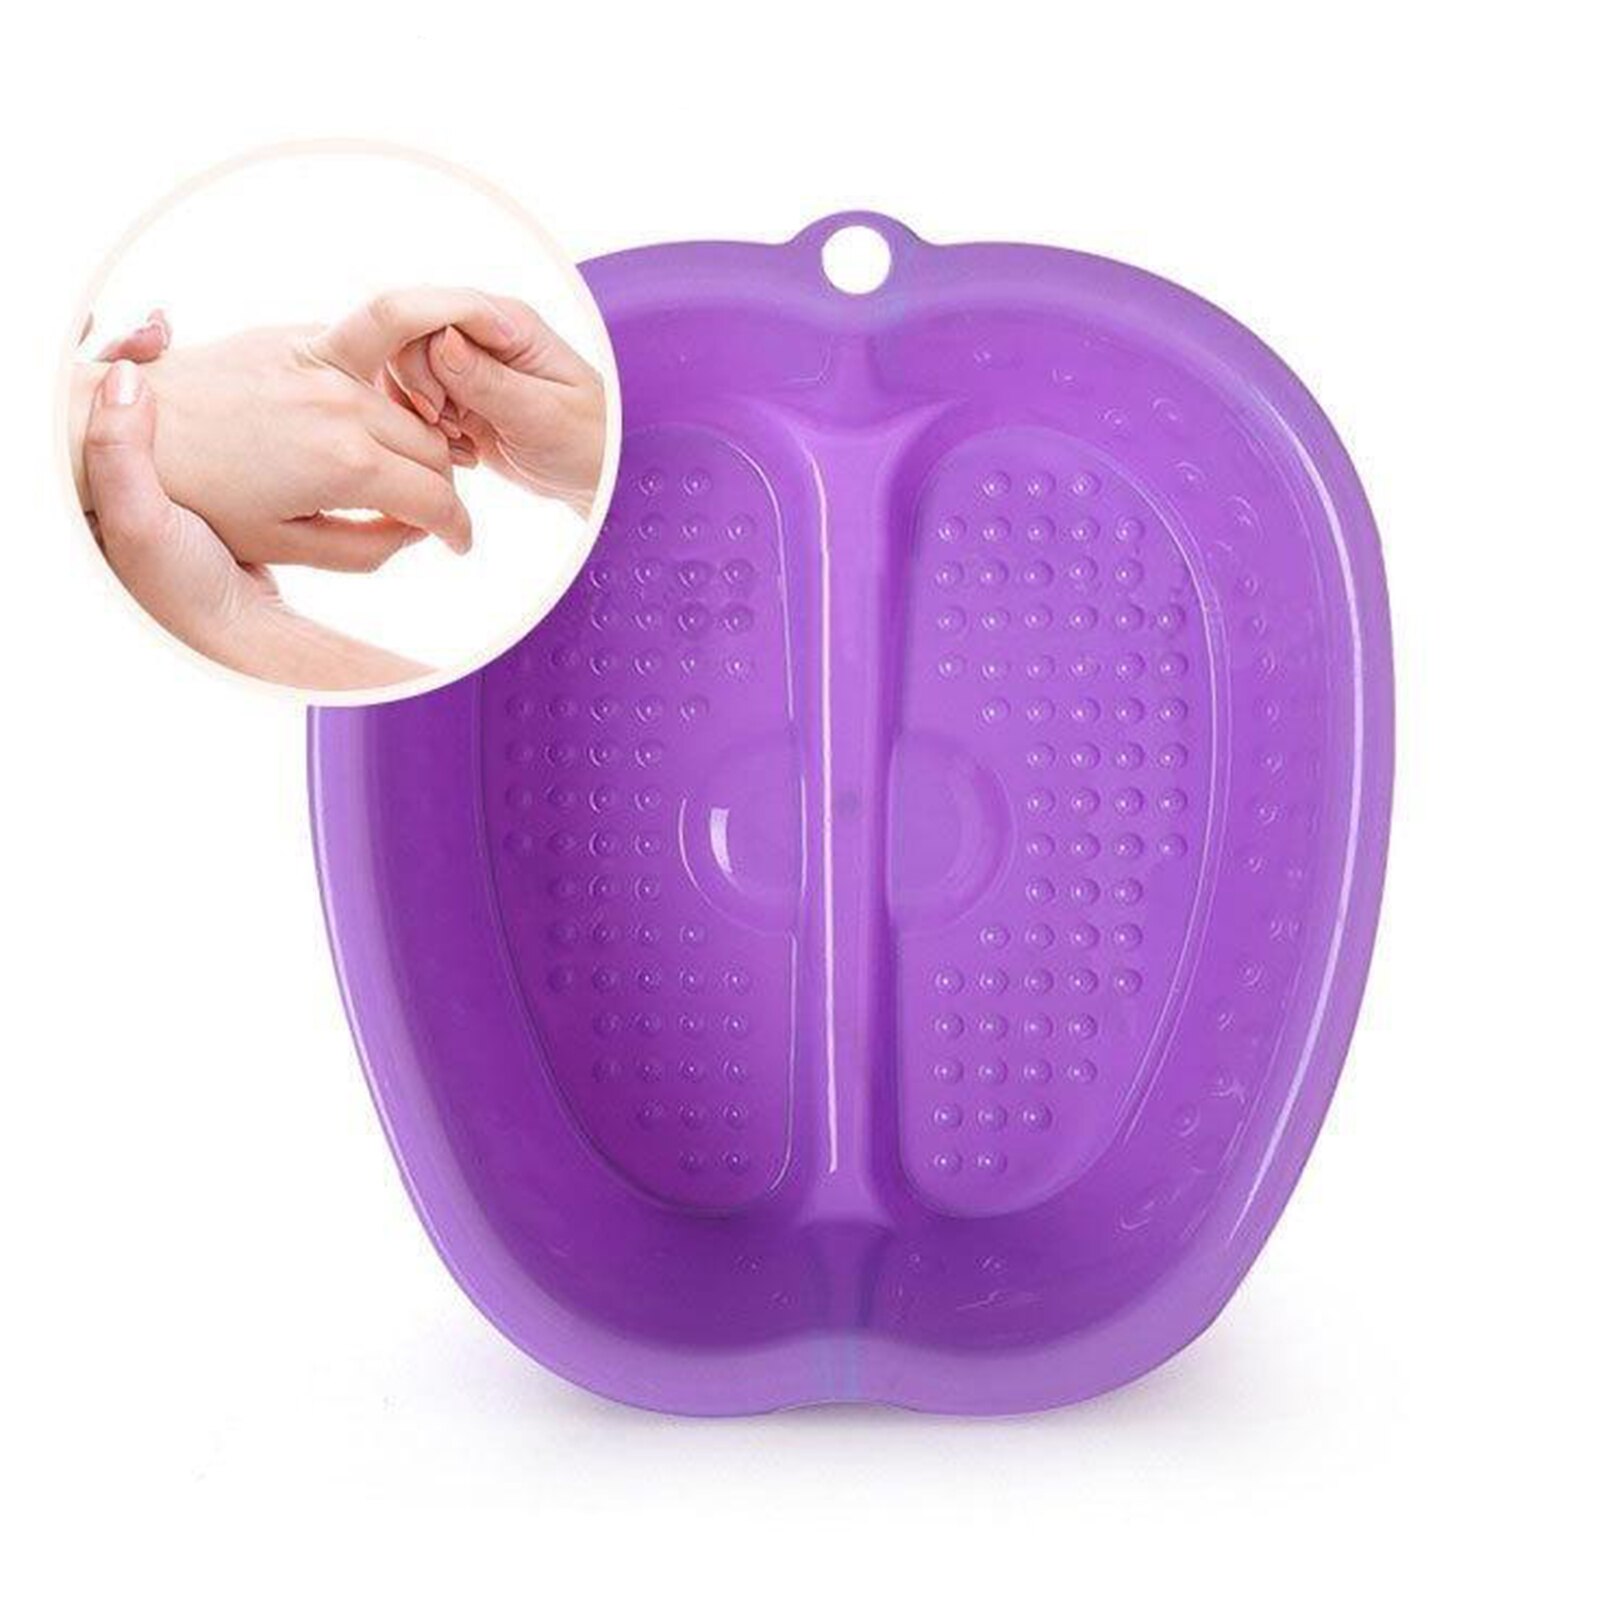 Foot Basin for Foot Bath Large Size Home Foot Spa ...